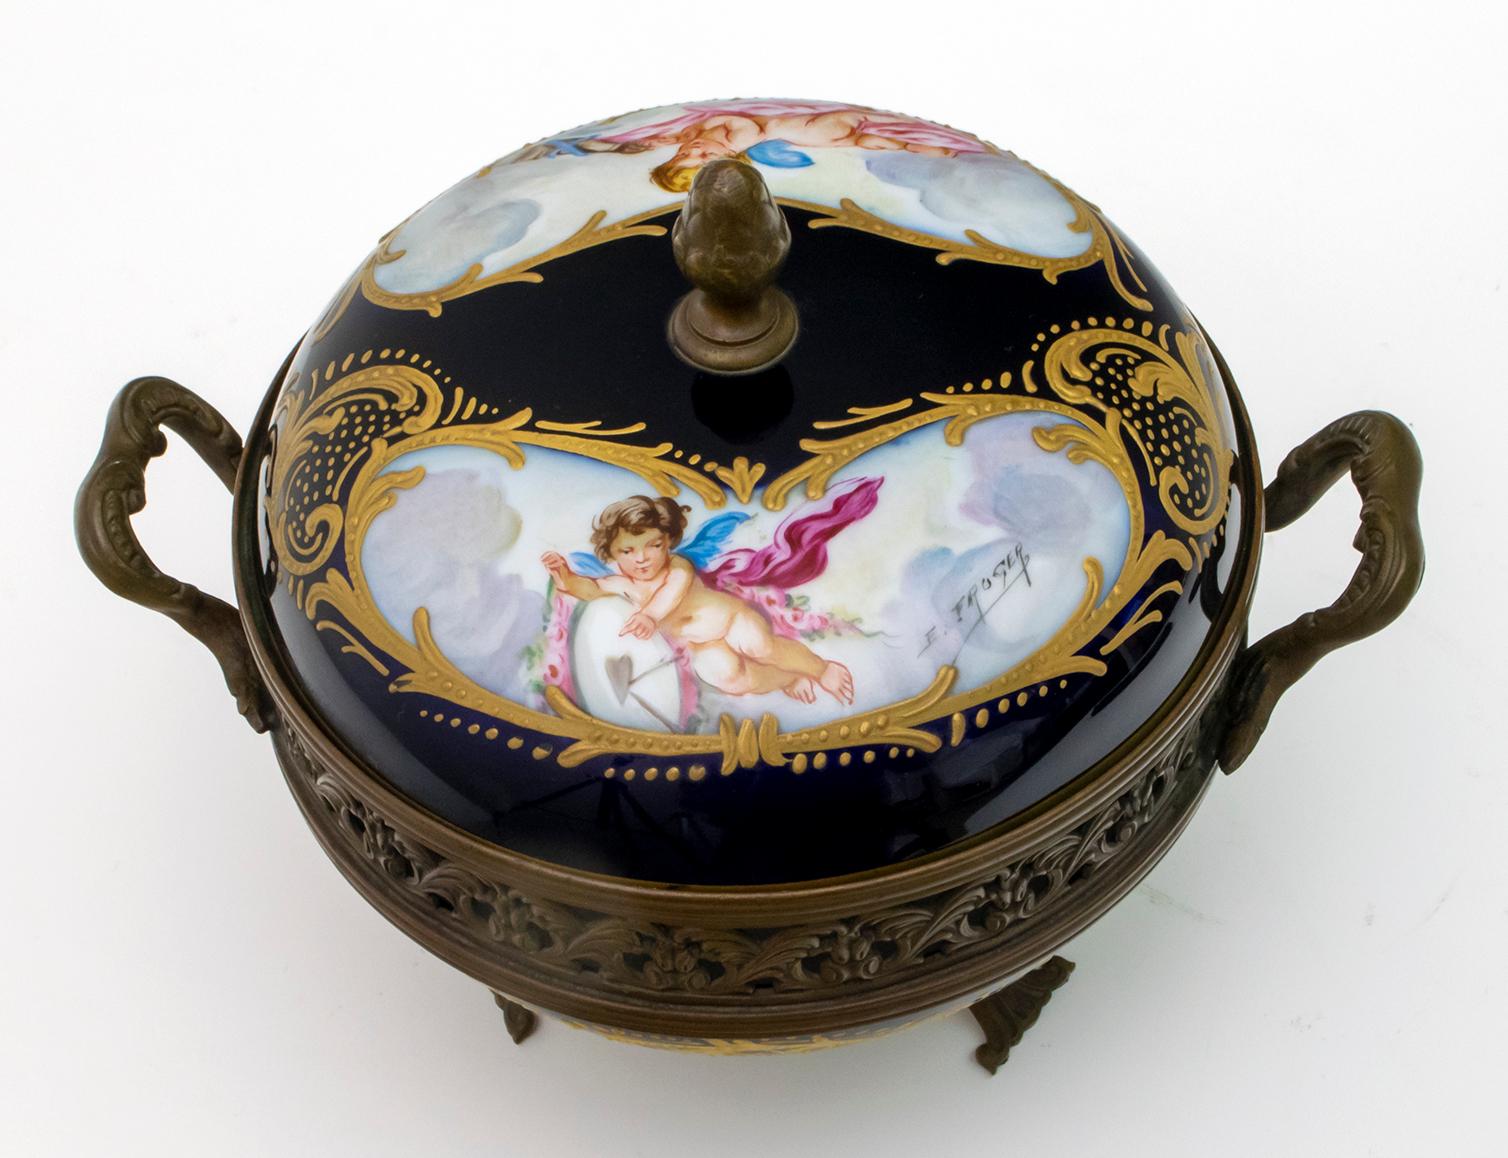 Cobalt blue and gold with two cartouches on the lid each with a winged cherub and a dove signed E. Froger. Perforated bronze strap with handles which is attached to the bottom of the bowl which is housed in a bronze base. Sevres marks on the inside